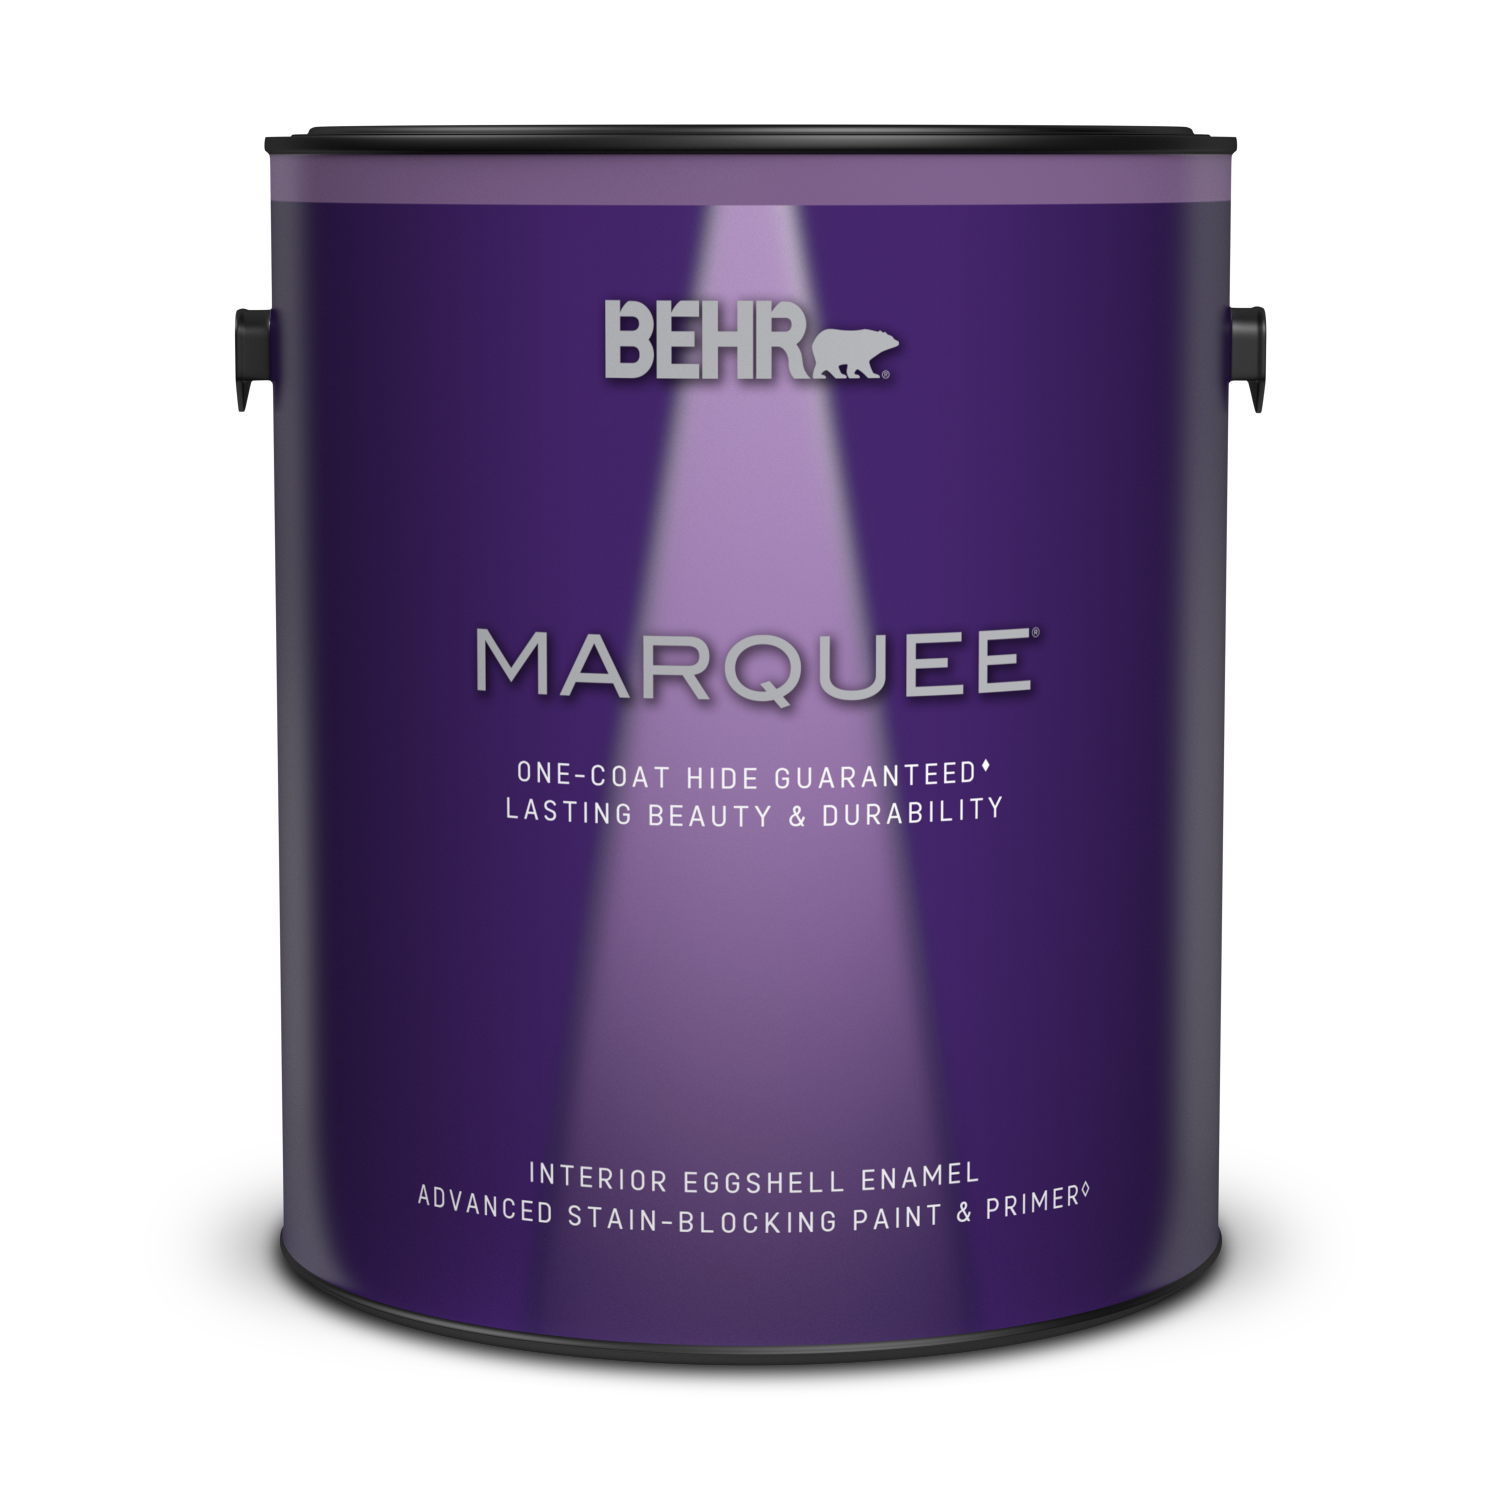 1 gallon can of Marquee Interior Eggshell Enamel Paint